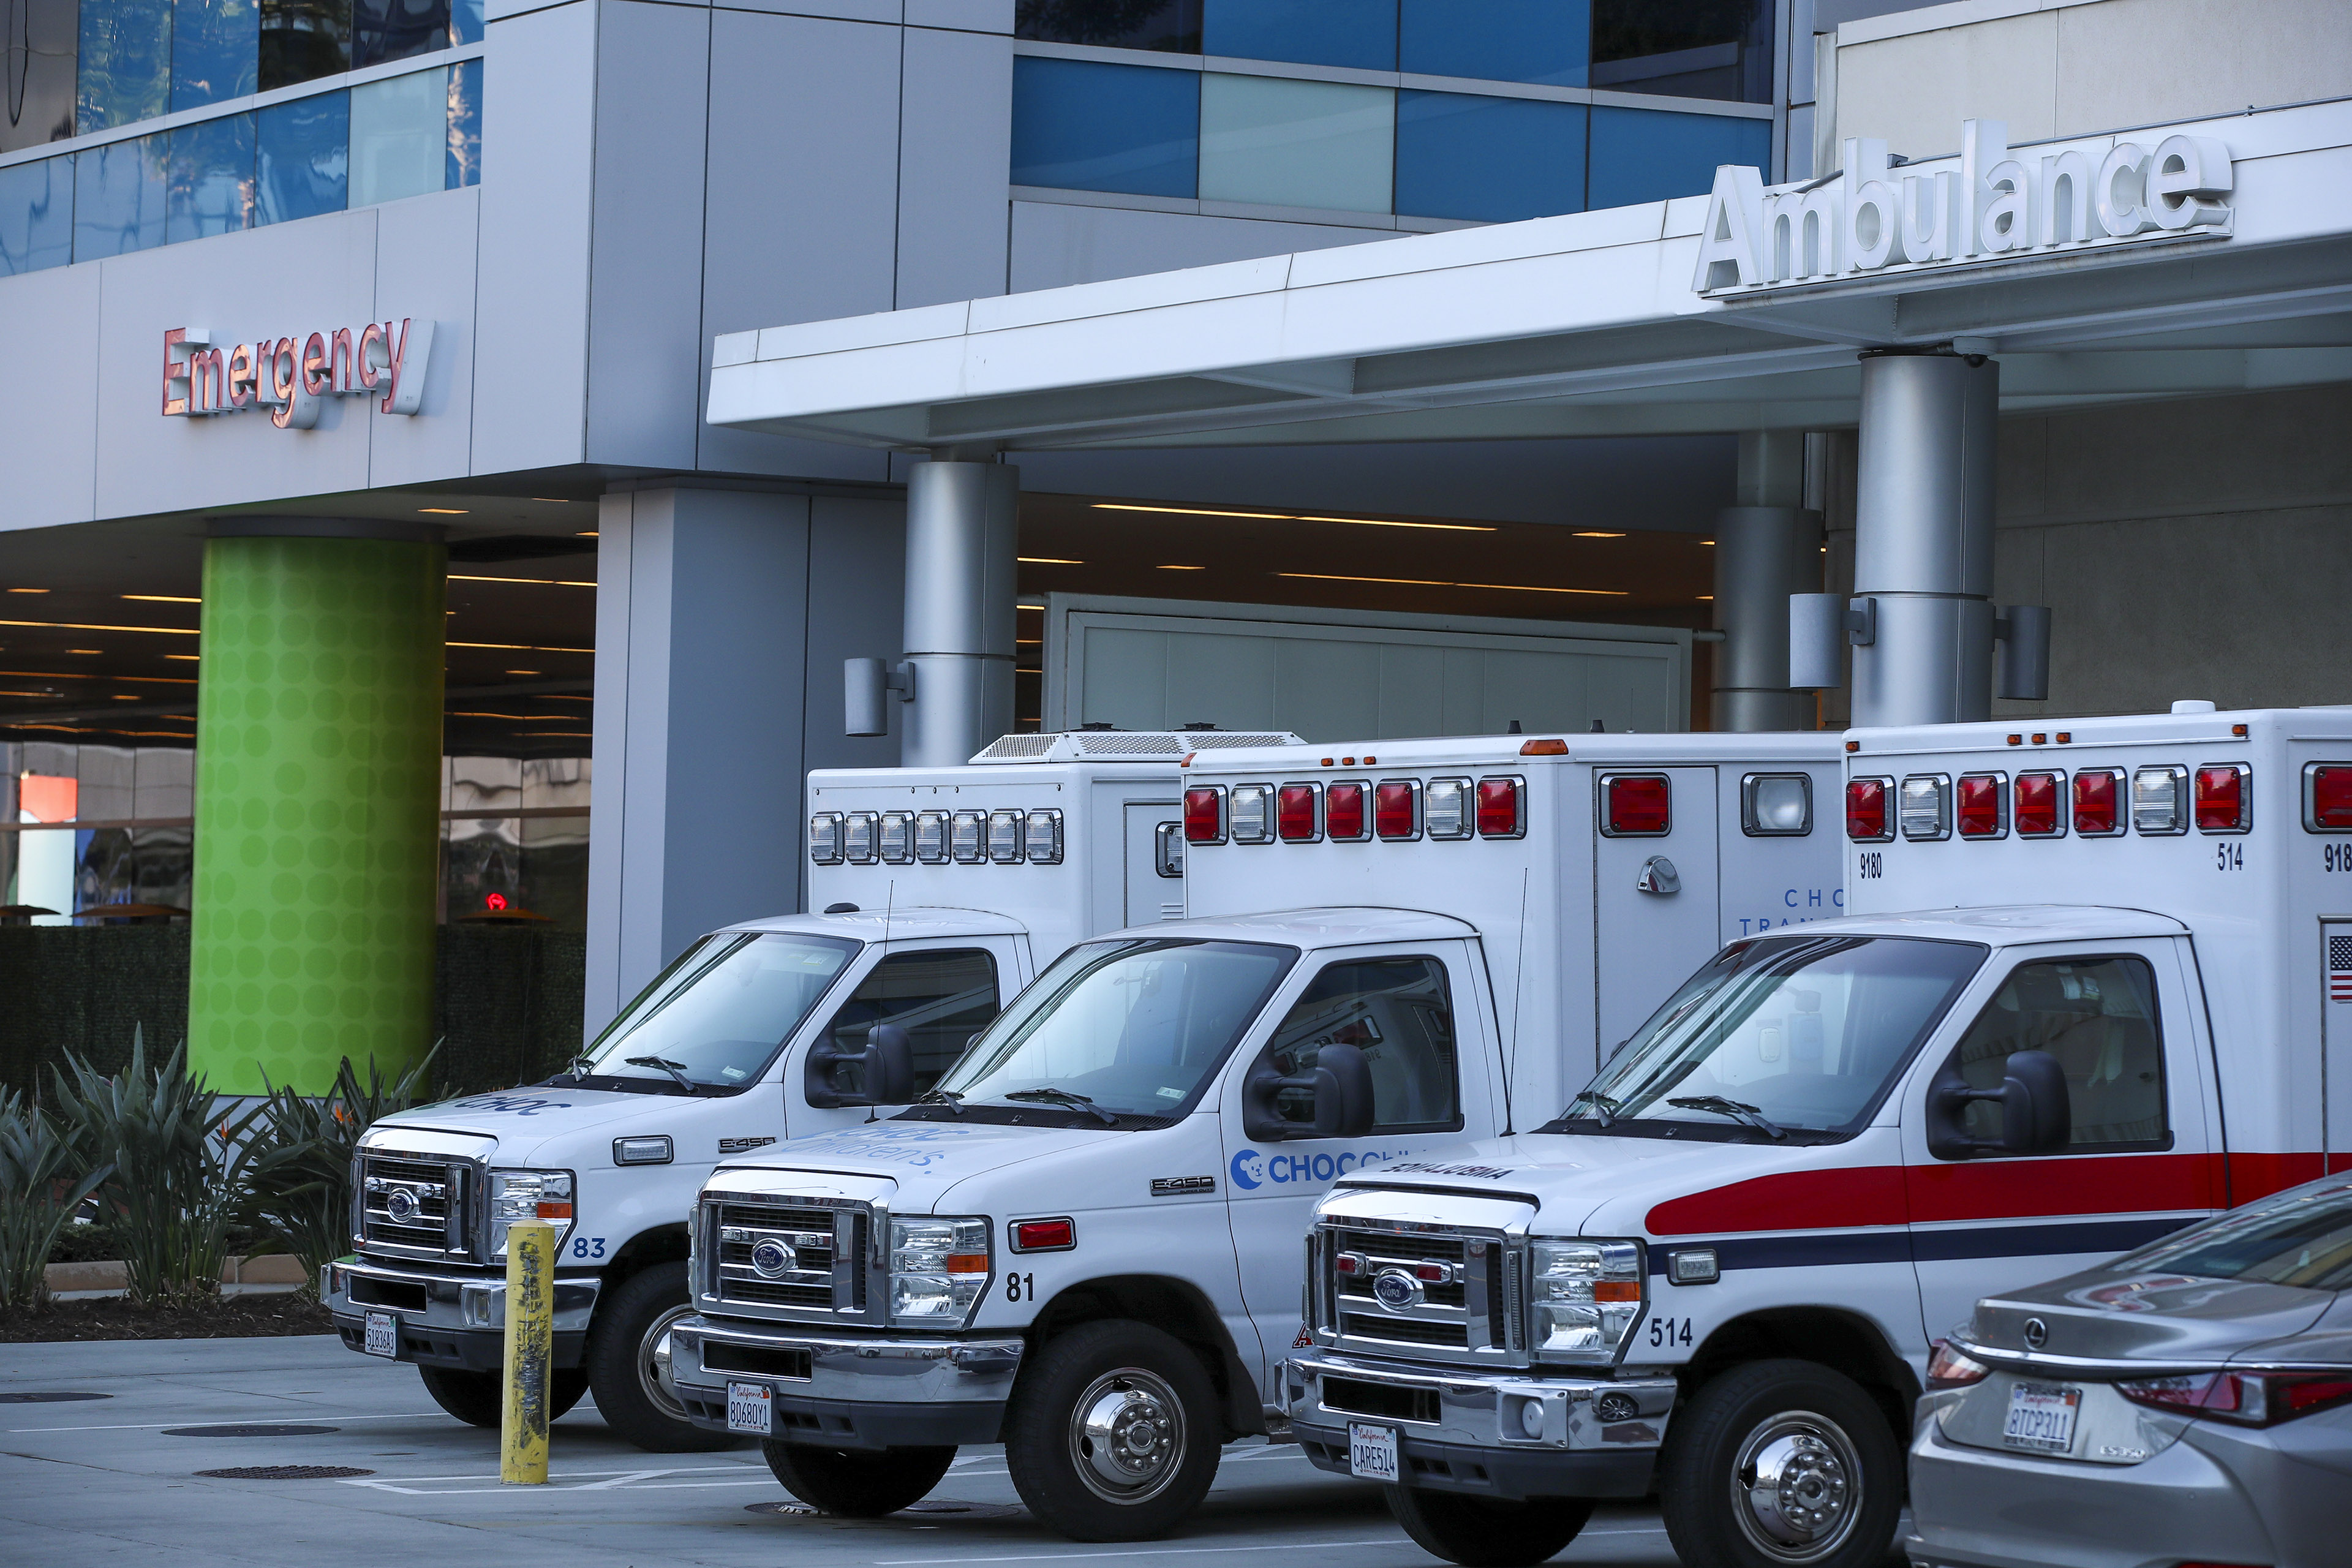 Study finds recent change in EMS transport policy could improve